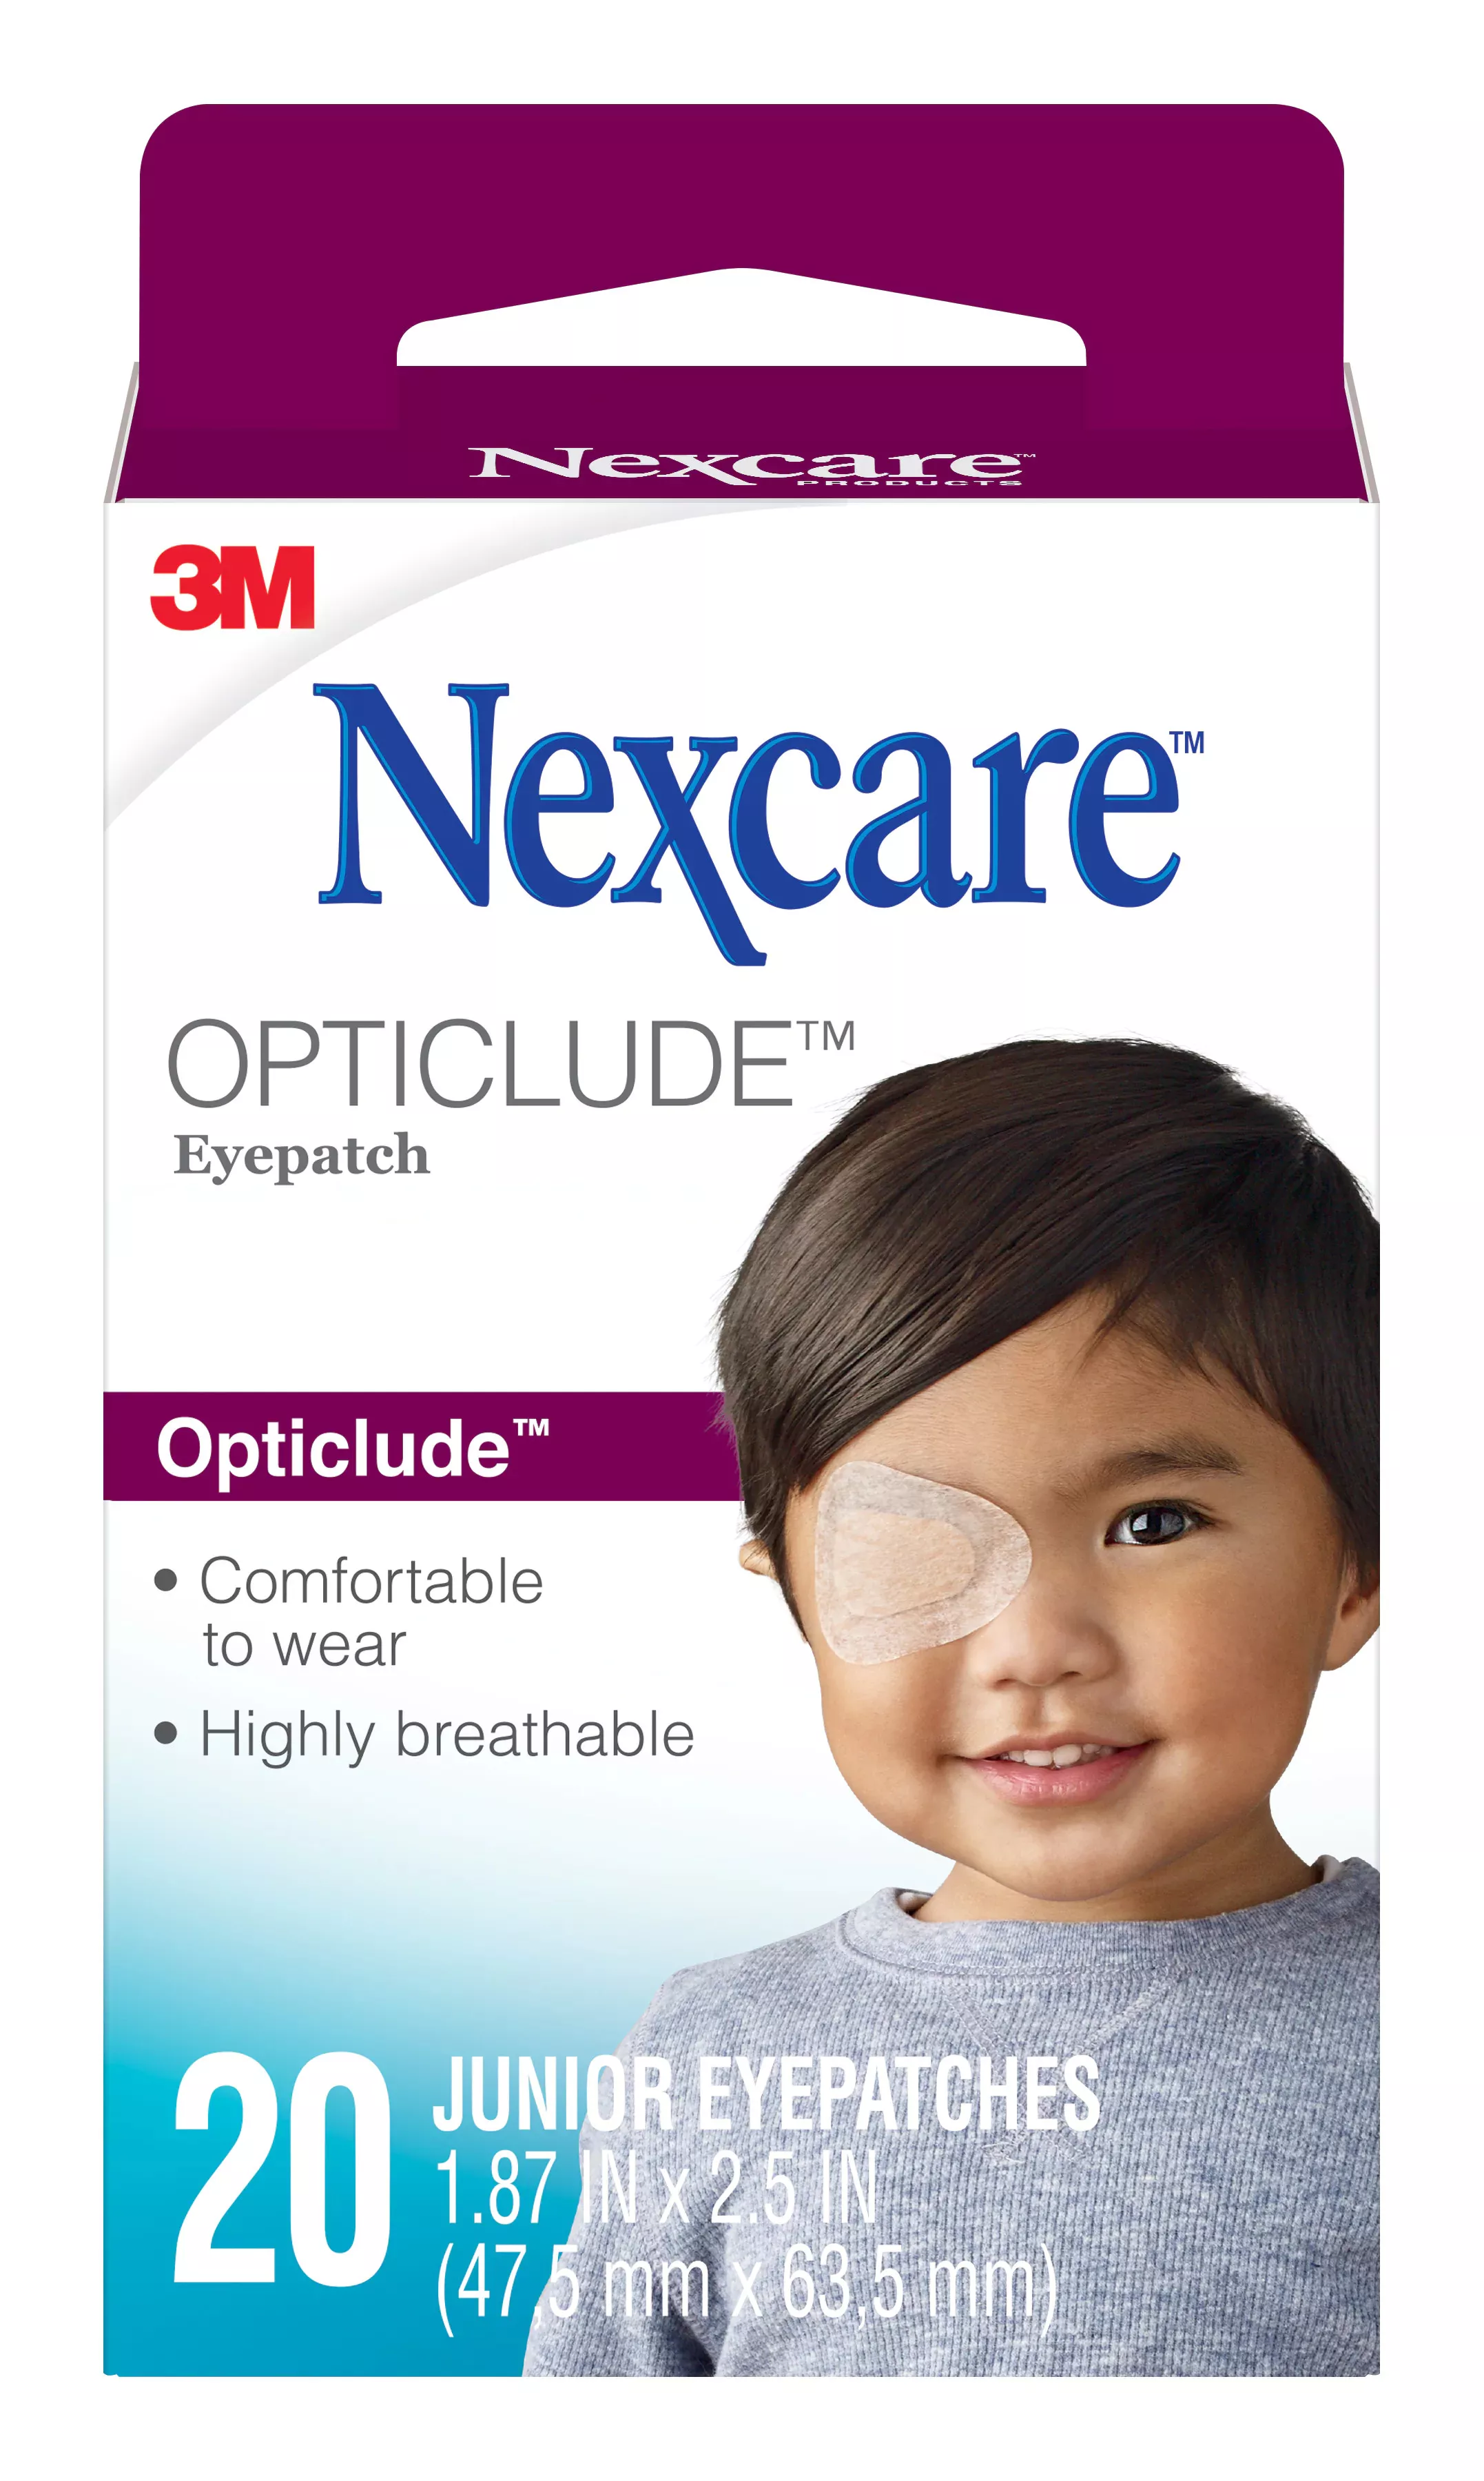 Nexcare™ Opticlude™ Orthoptic Eye Patch 1537, Junior, 2.44 in x 1.81 in
(62 mm x 46 mm) 20 Patches/Box